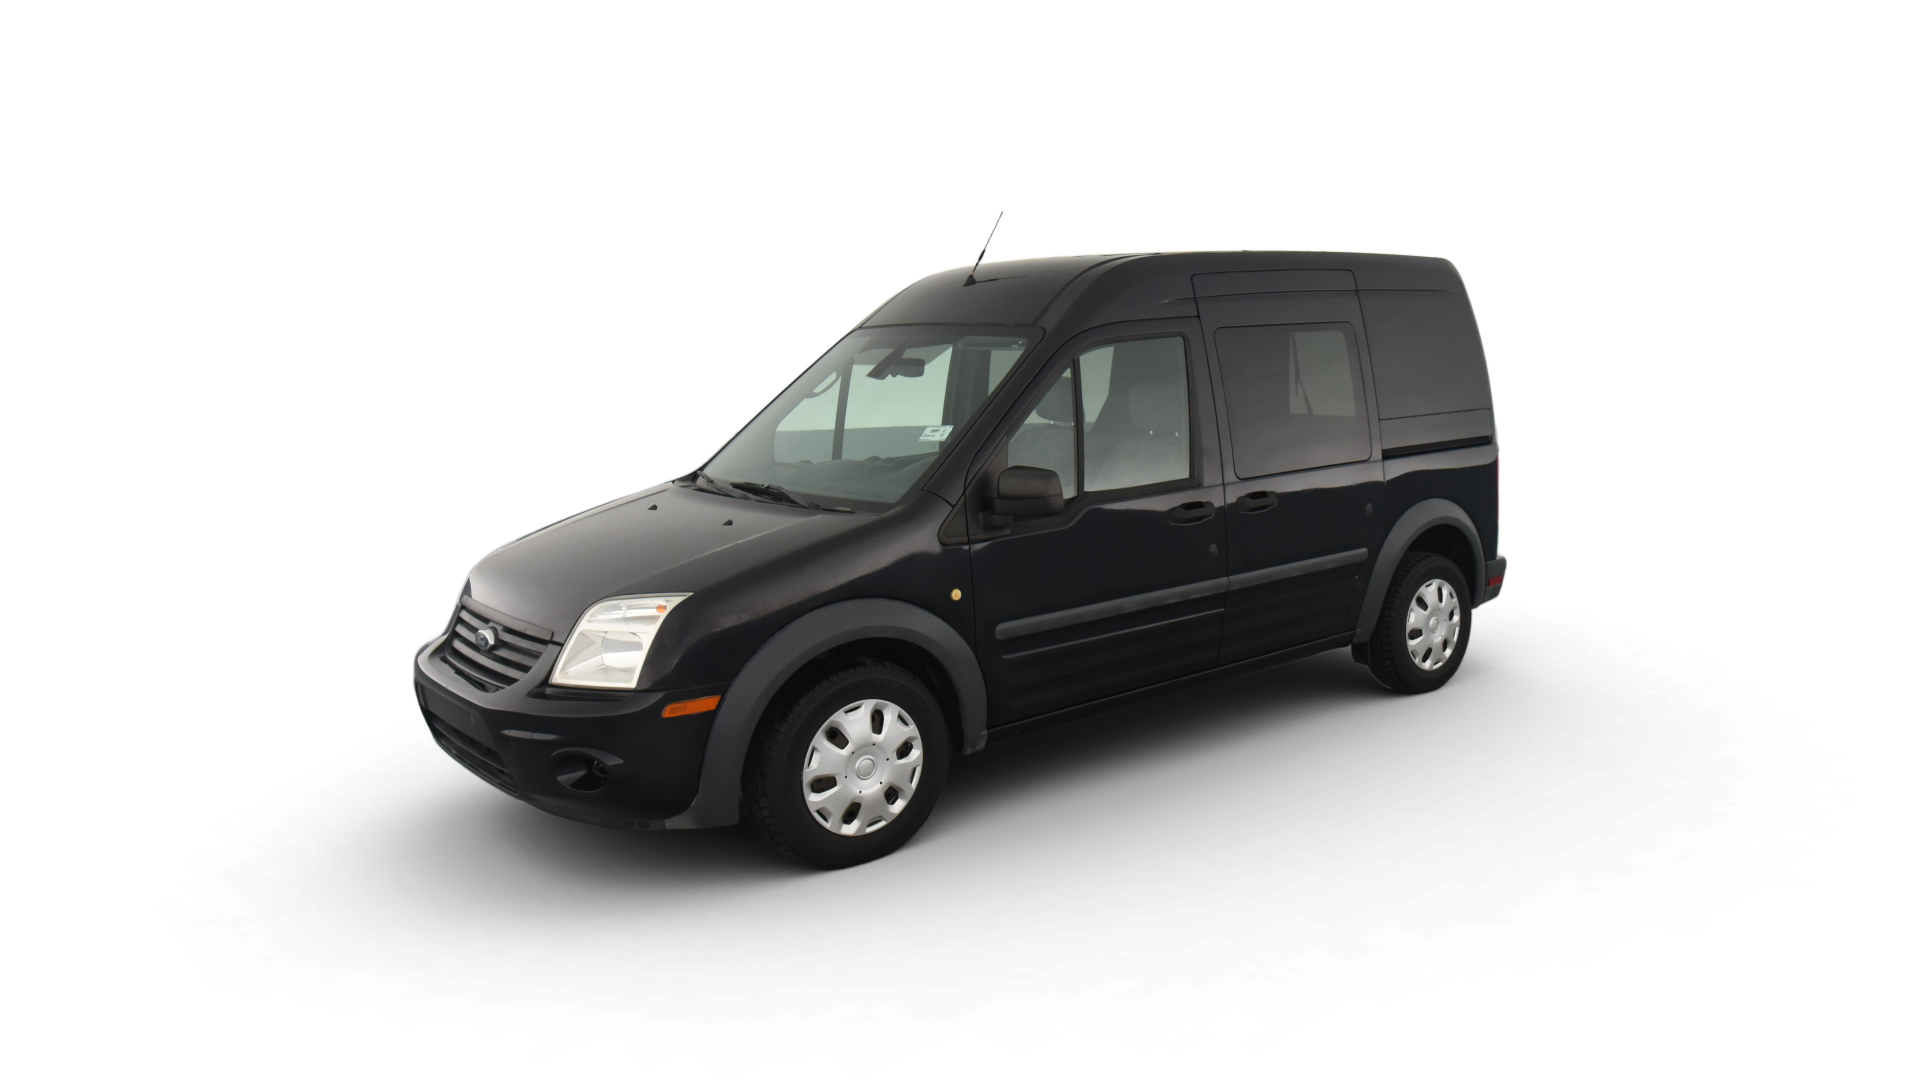 Ford Transit Connect model image.